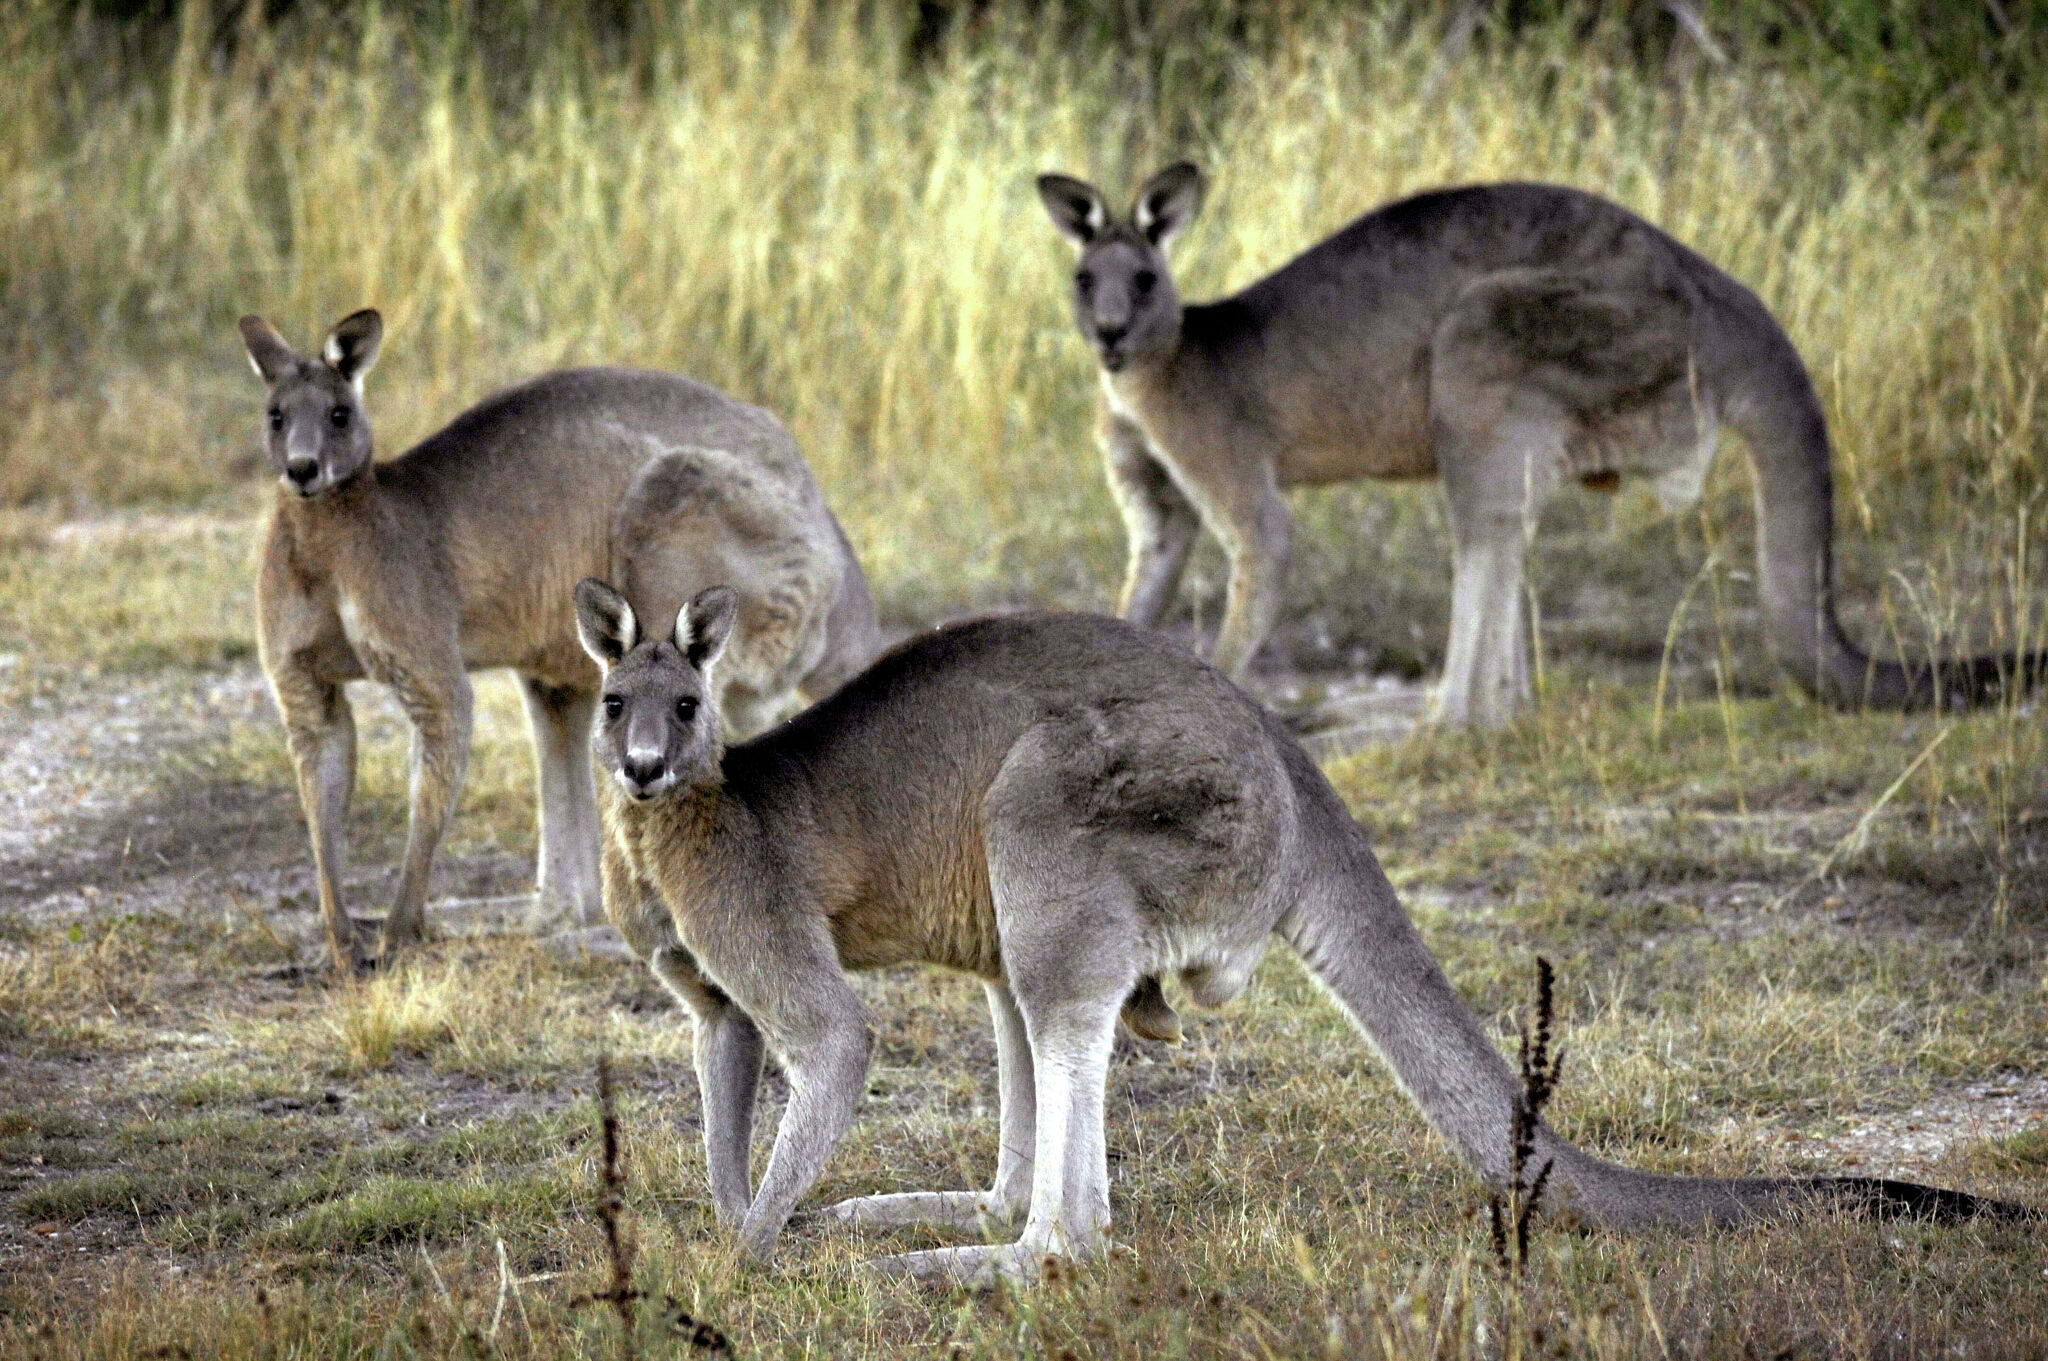 Why is Connecticut considering a ban on kangaroo products? Soccer cleats.